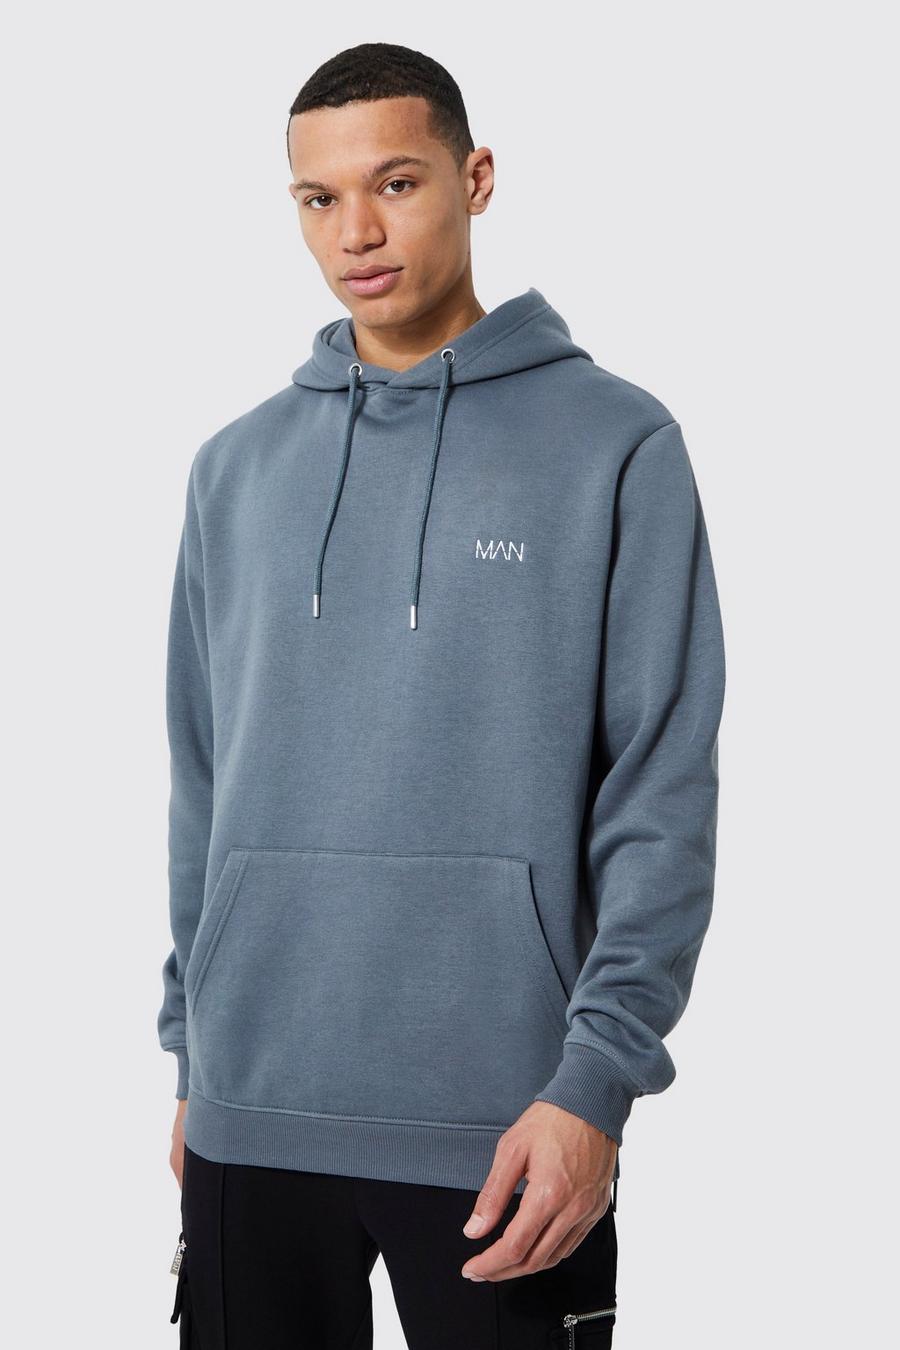 Blue Tall Side Zip Man Embroidered Hoodie